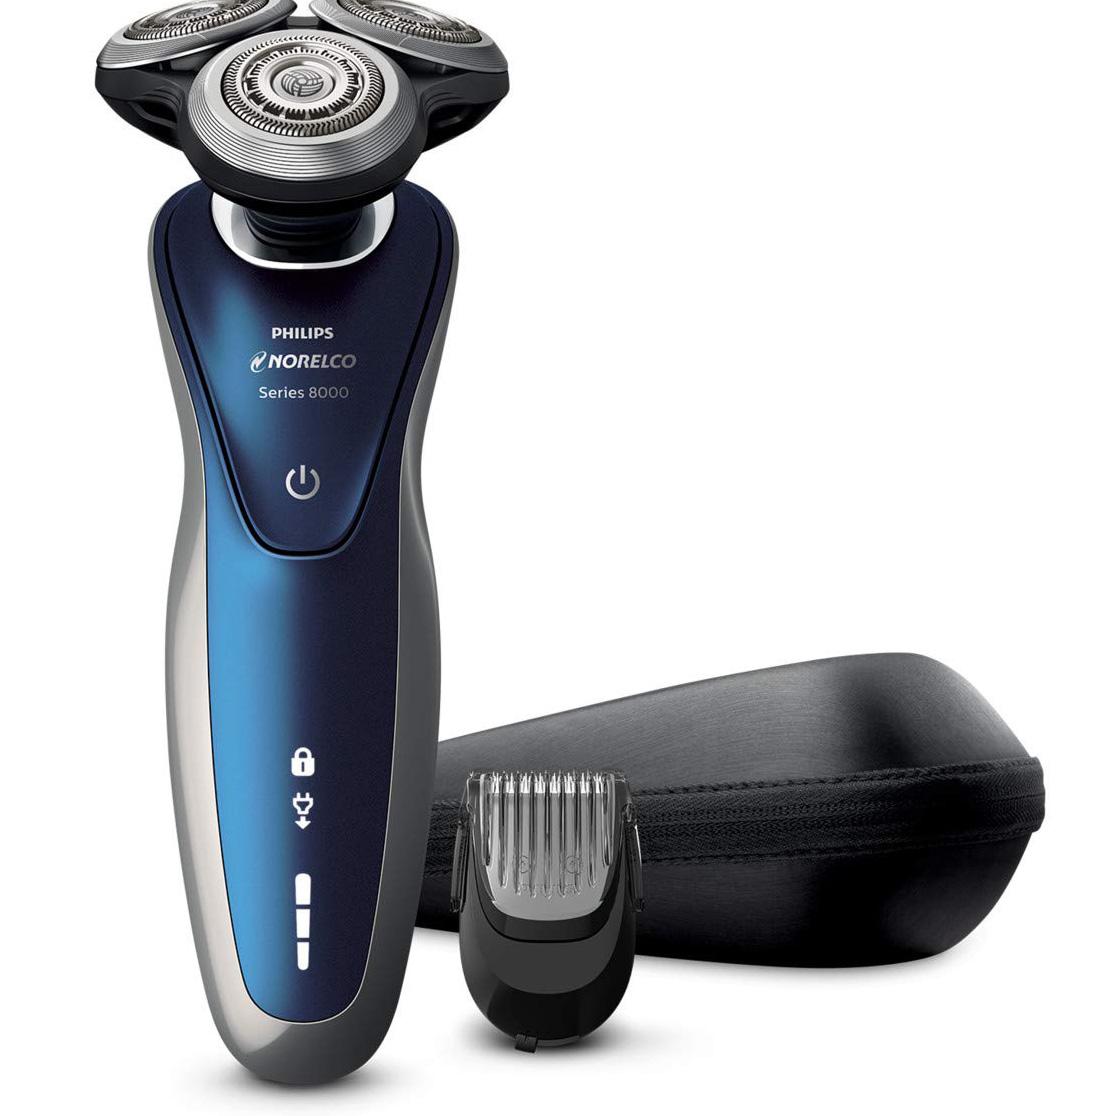 Philips Norelco S8950 Shaver Rechargeable Wet Dry Electric Shaver for $99.95 Shipped